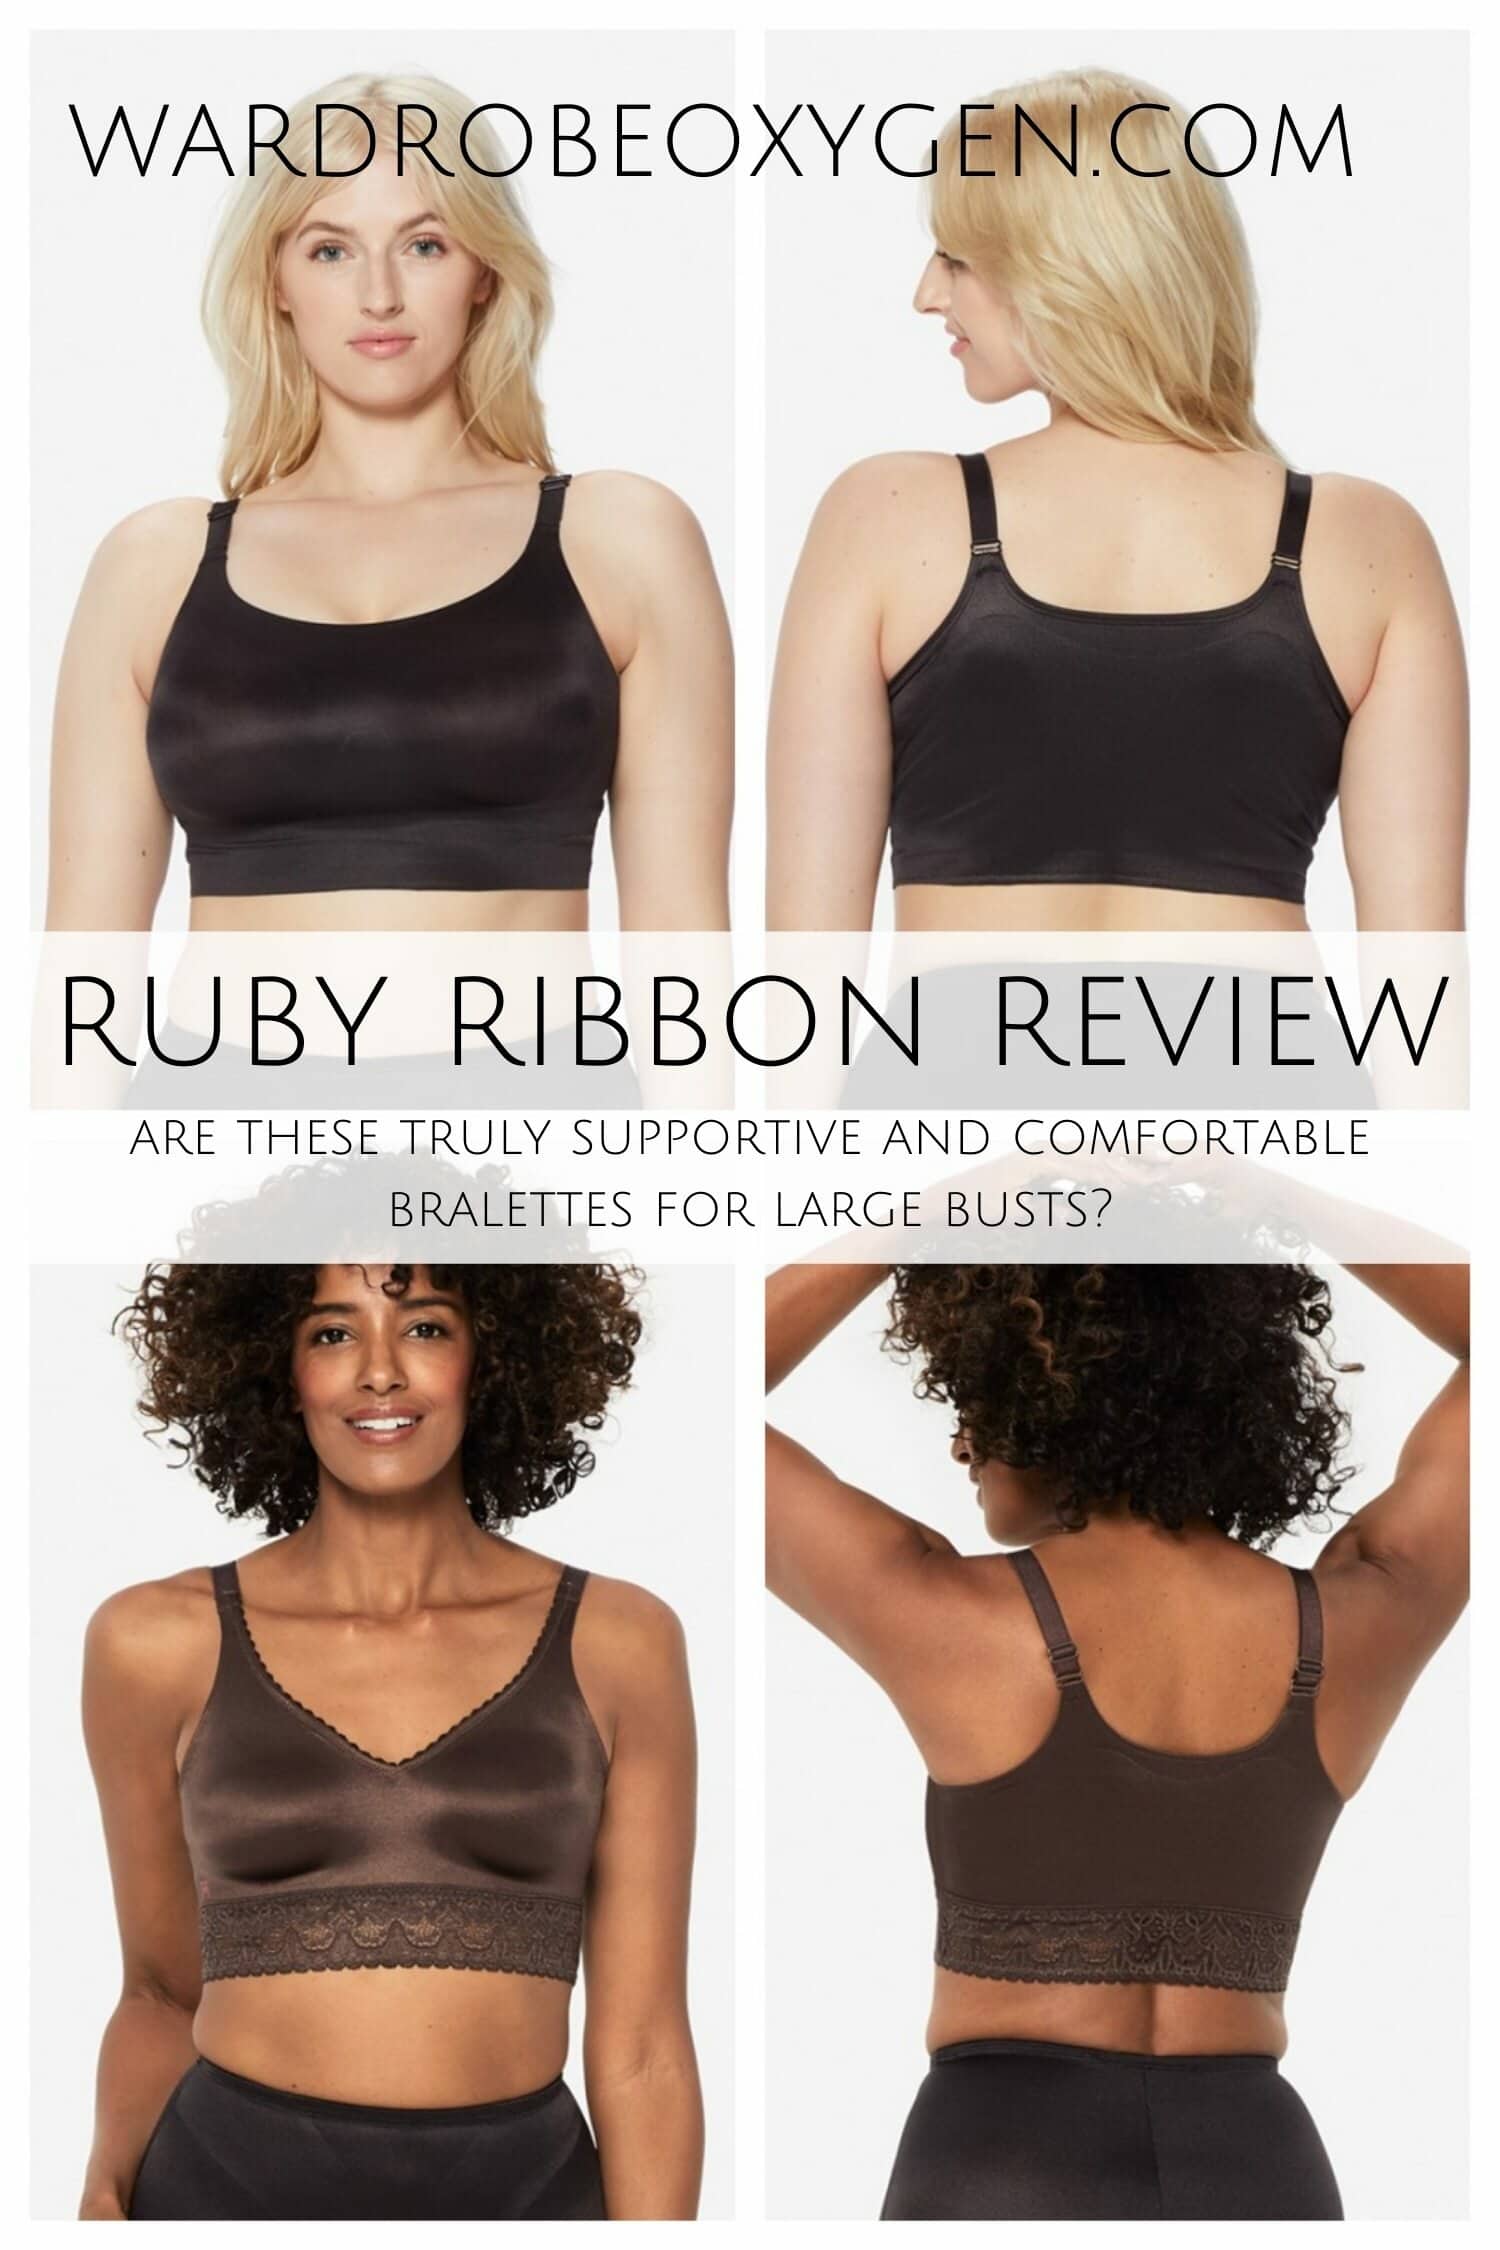 38j to a 40L! Women wear the wrong size bra every day and don't know the  harm that is happening. I would love to help you get a health